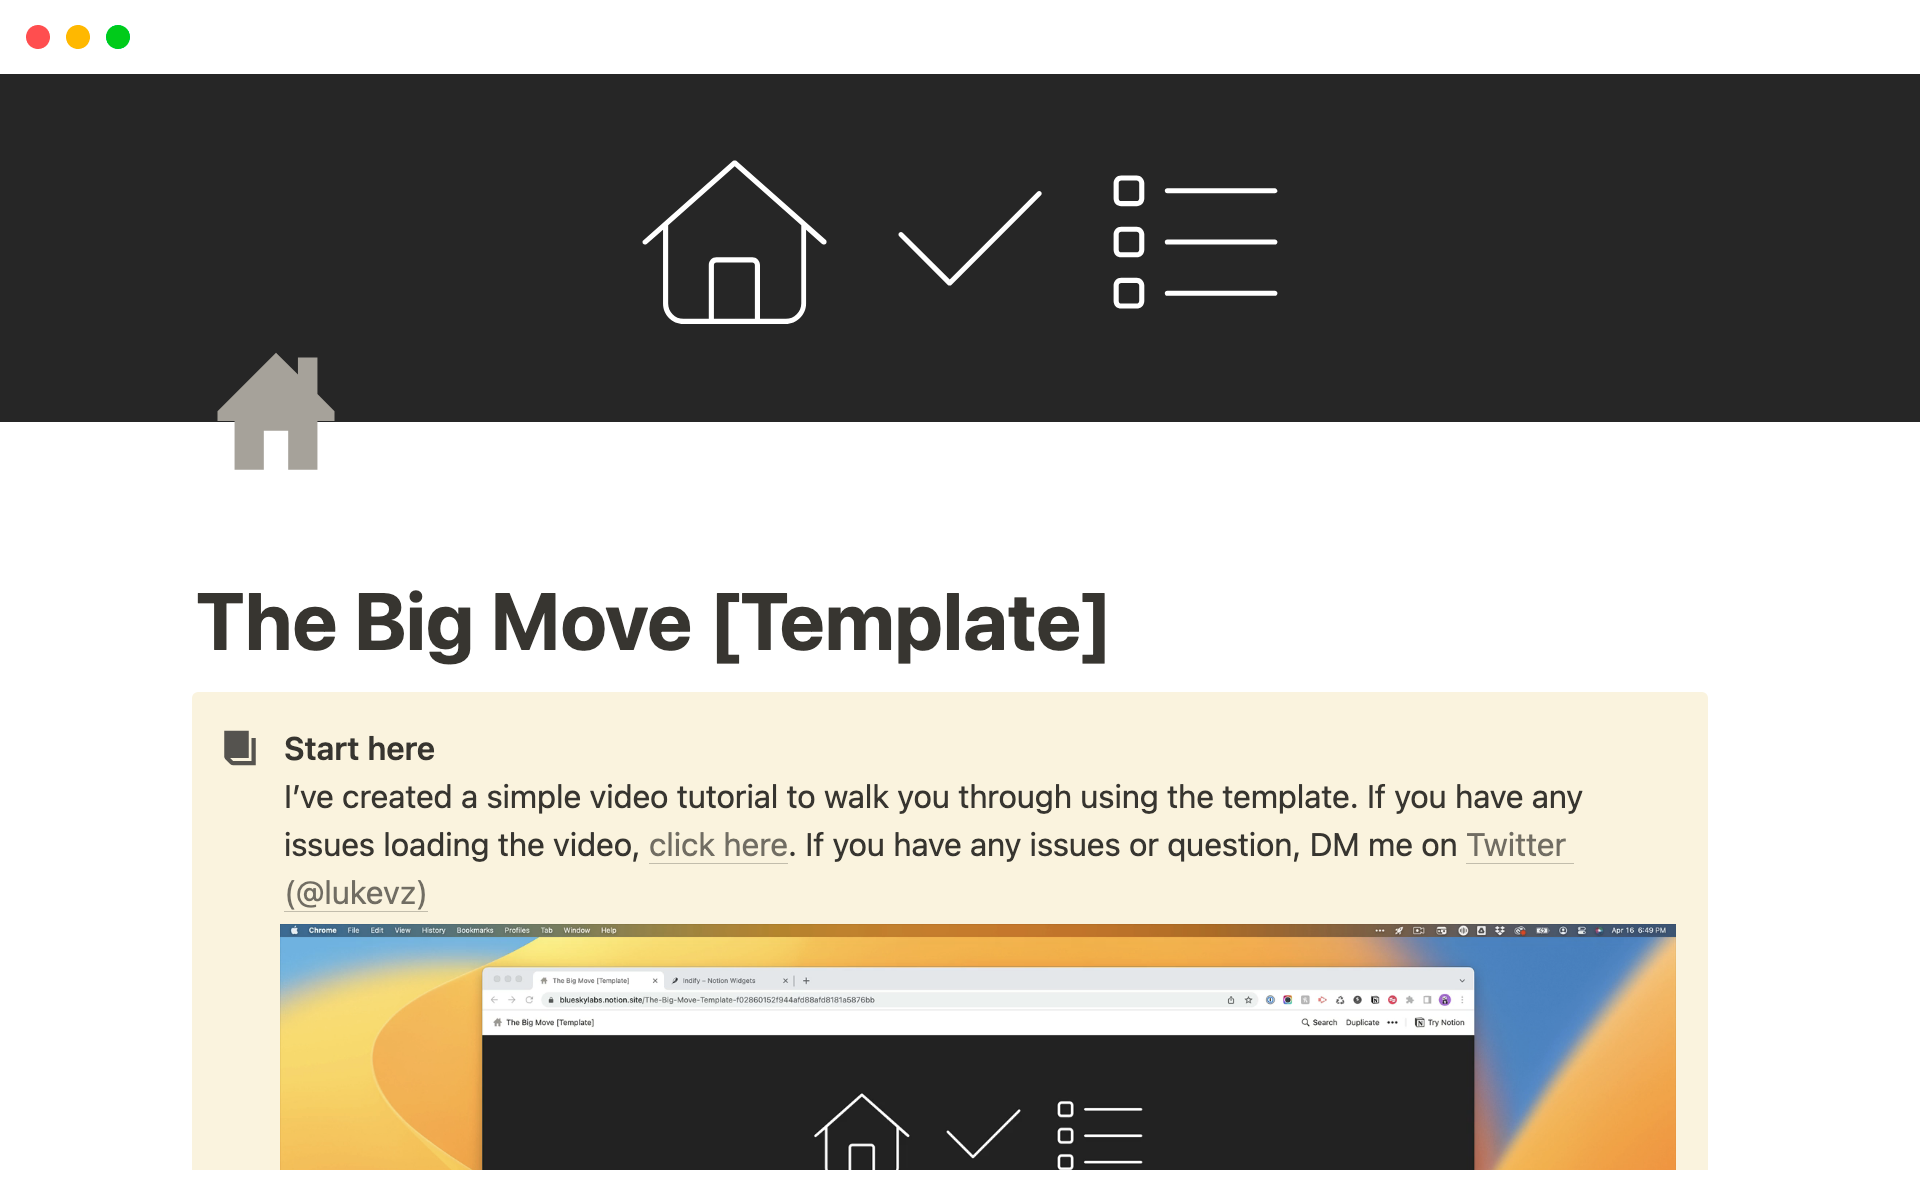 This template covers all aspects of the moving process and helps you track everything in one place.